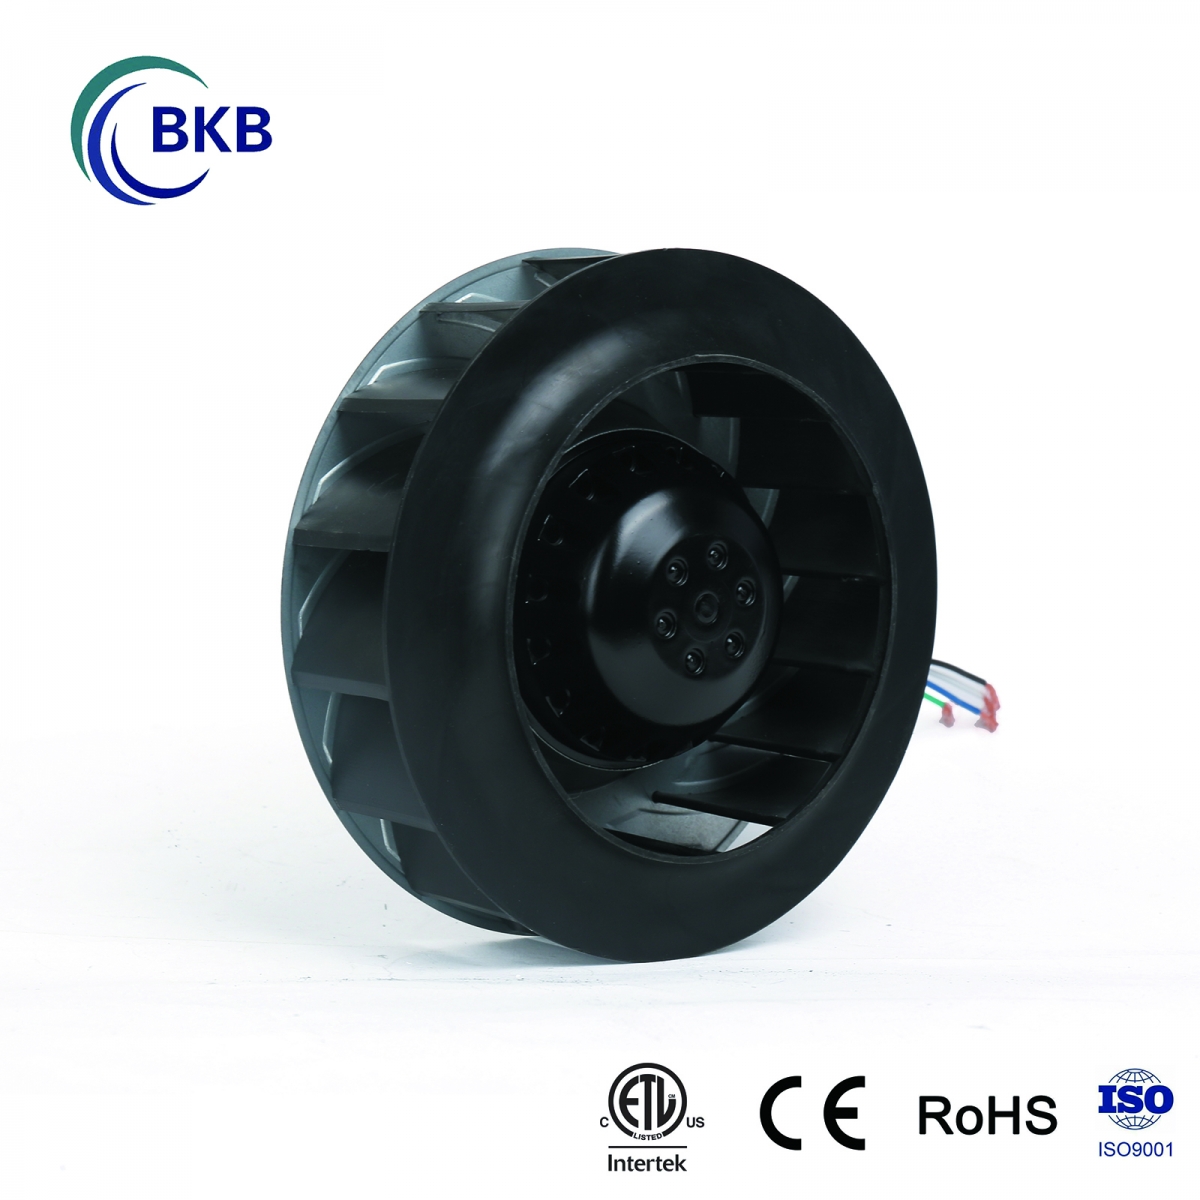 Centrifugal fans use the kinetic energy of the impeller to move the air flow.-SUNLIGHT BLOWER,Centrifugal Fans, Inline Fans,Motors,Backward curved centrifugal fans ,Forward curved centrifugal fans ,inlet fans, EC fans